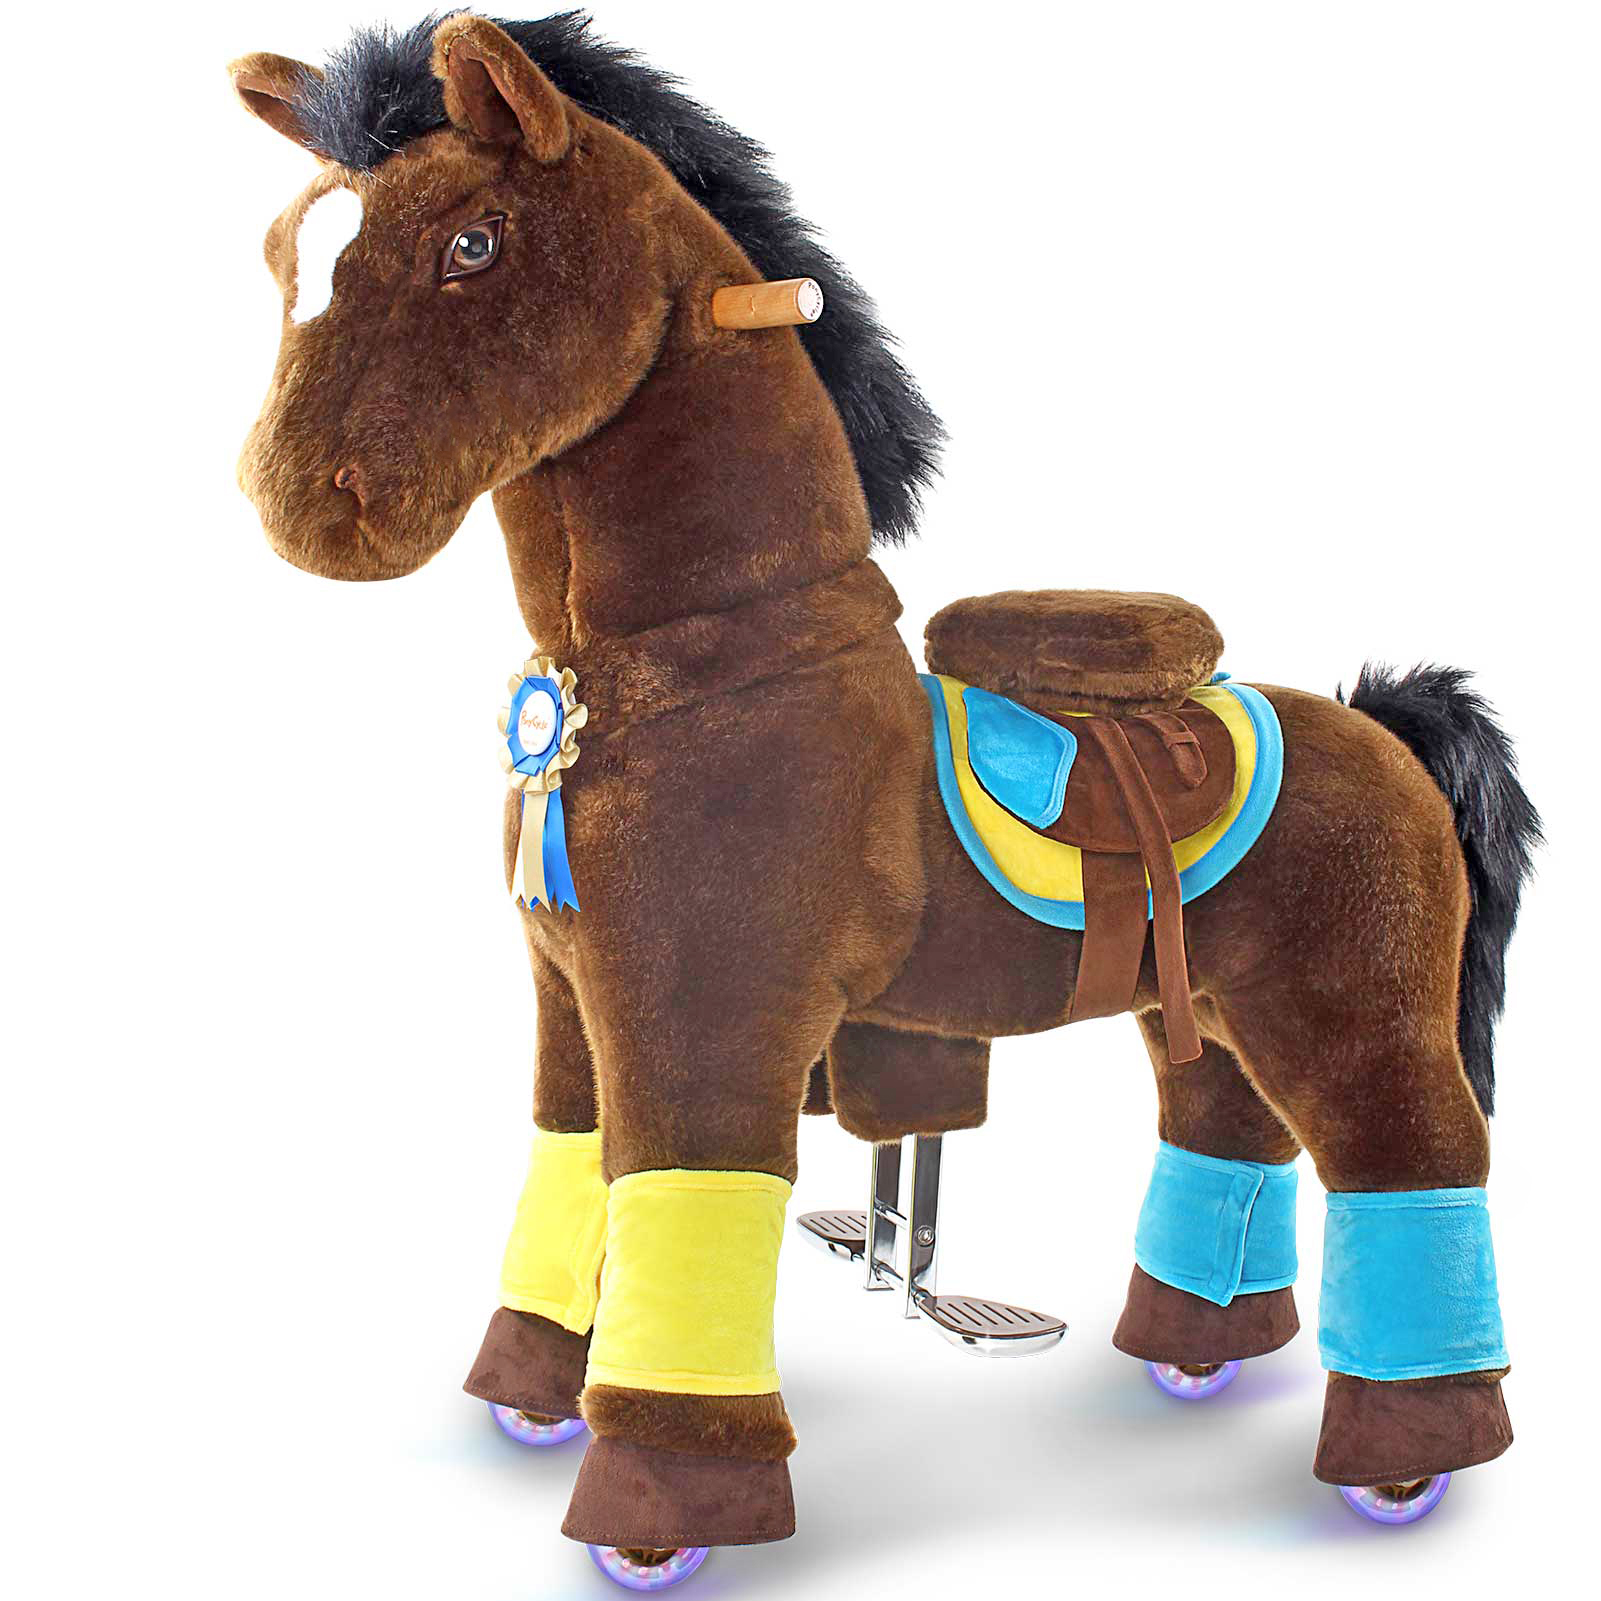 PonyCycle® Riding Horse Toy Model K Chocolate Brown